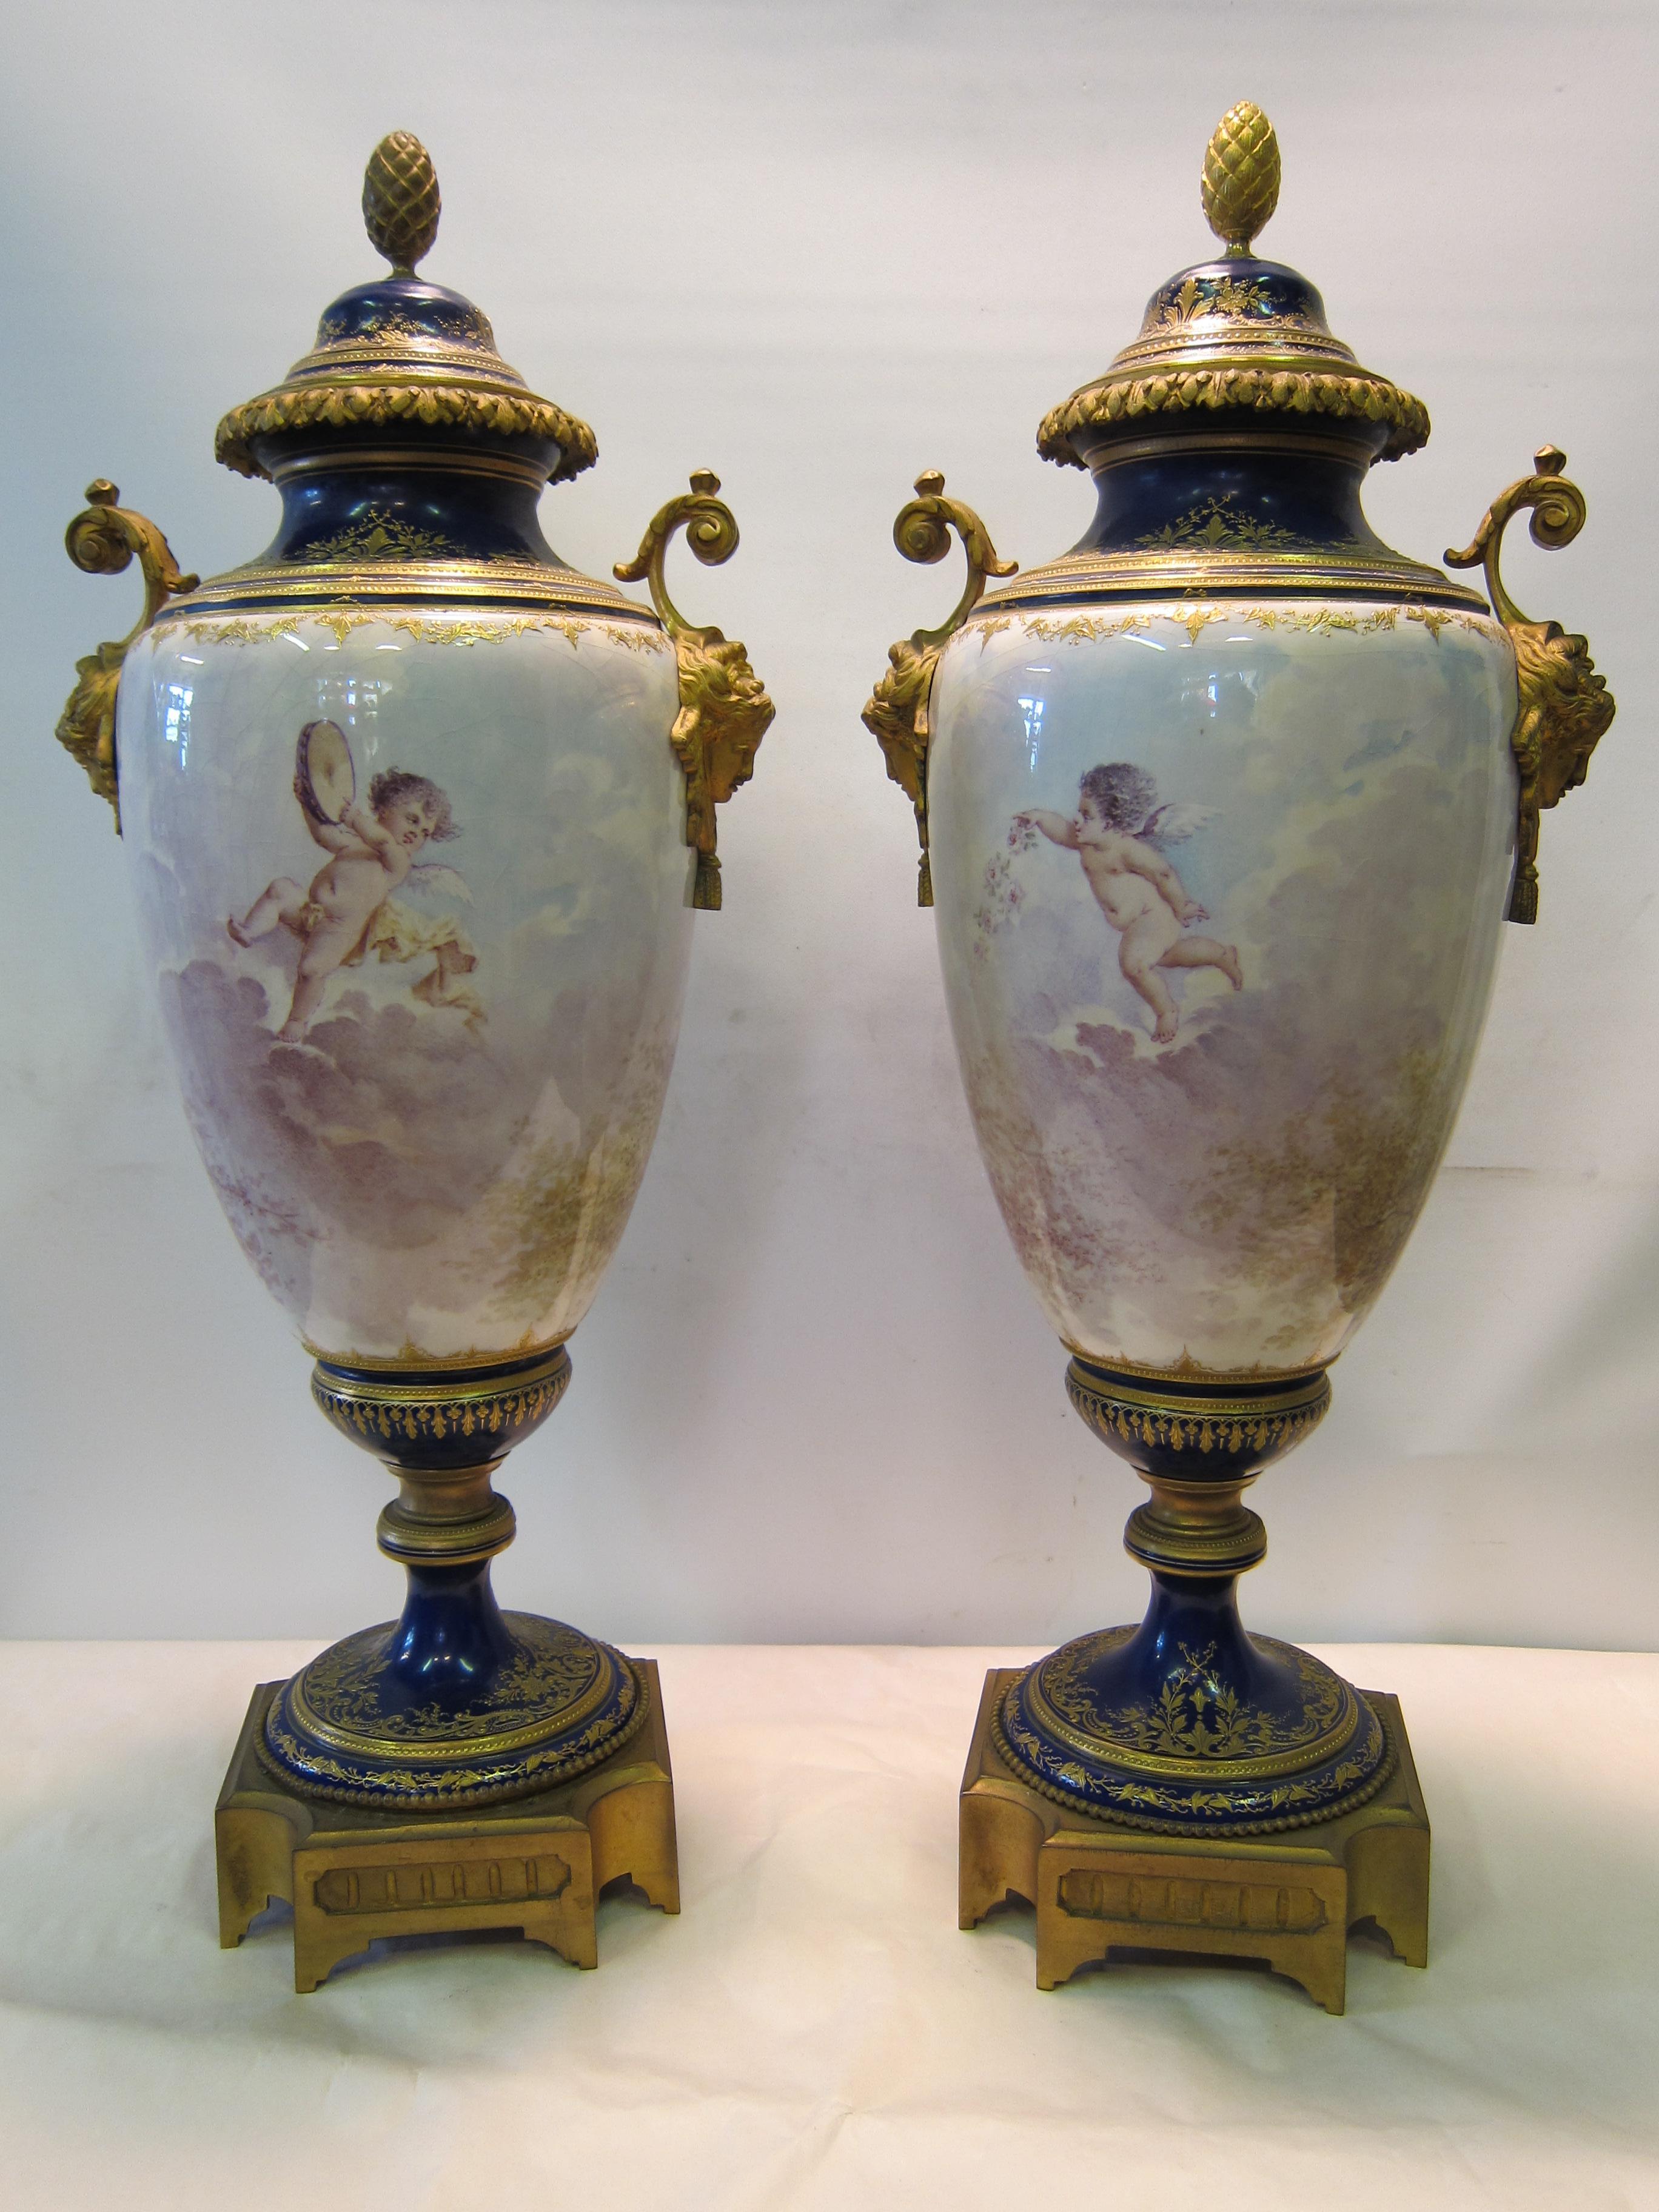 This fine pair of circa 1850s Sevres urns is signed by the artist Baston. The covered urns are beautifully hand painted & depict romantic scenes of courtship. Each urn features two young adults, costumed in period clothing, closely guarded by